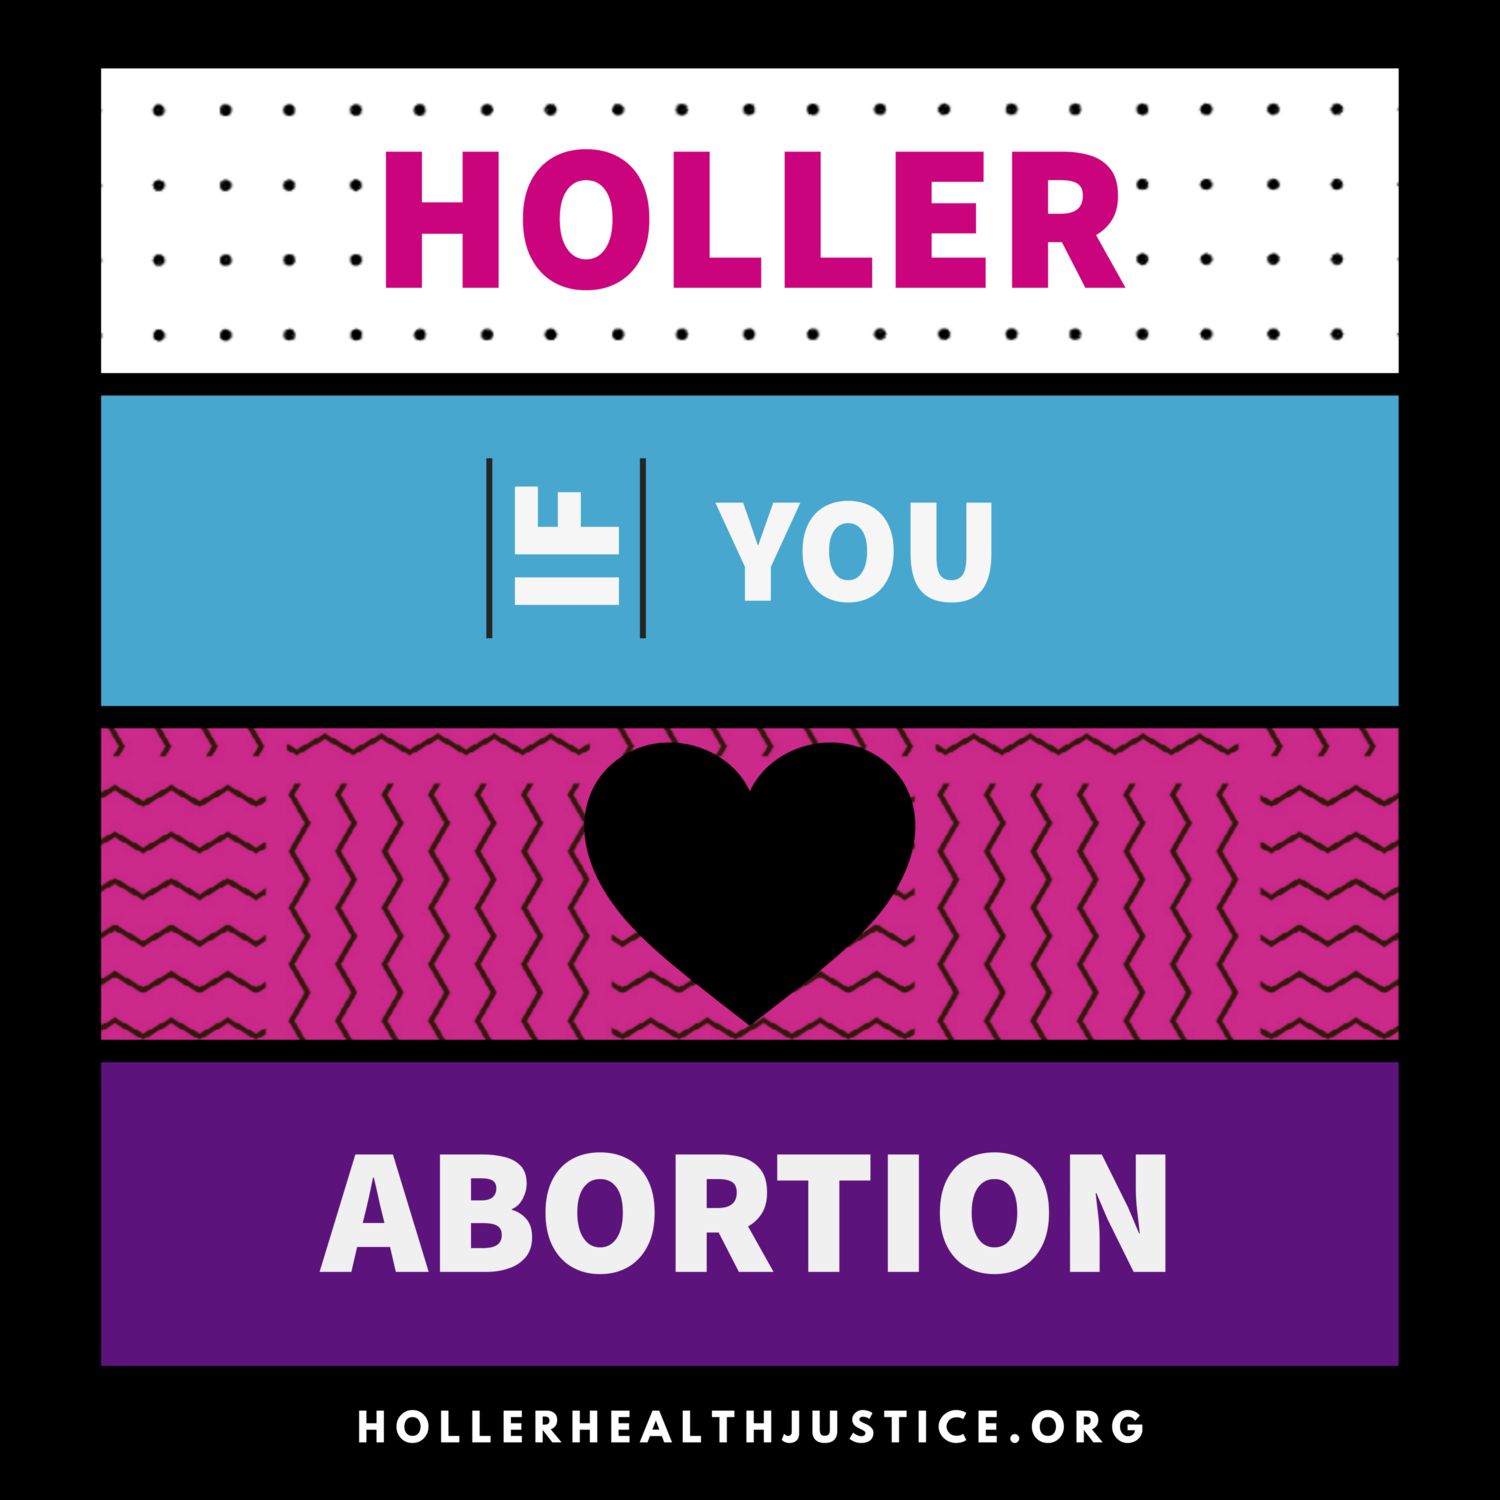 Holler if you <3 sticker, 3" x 3" square